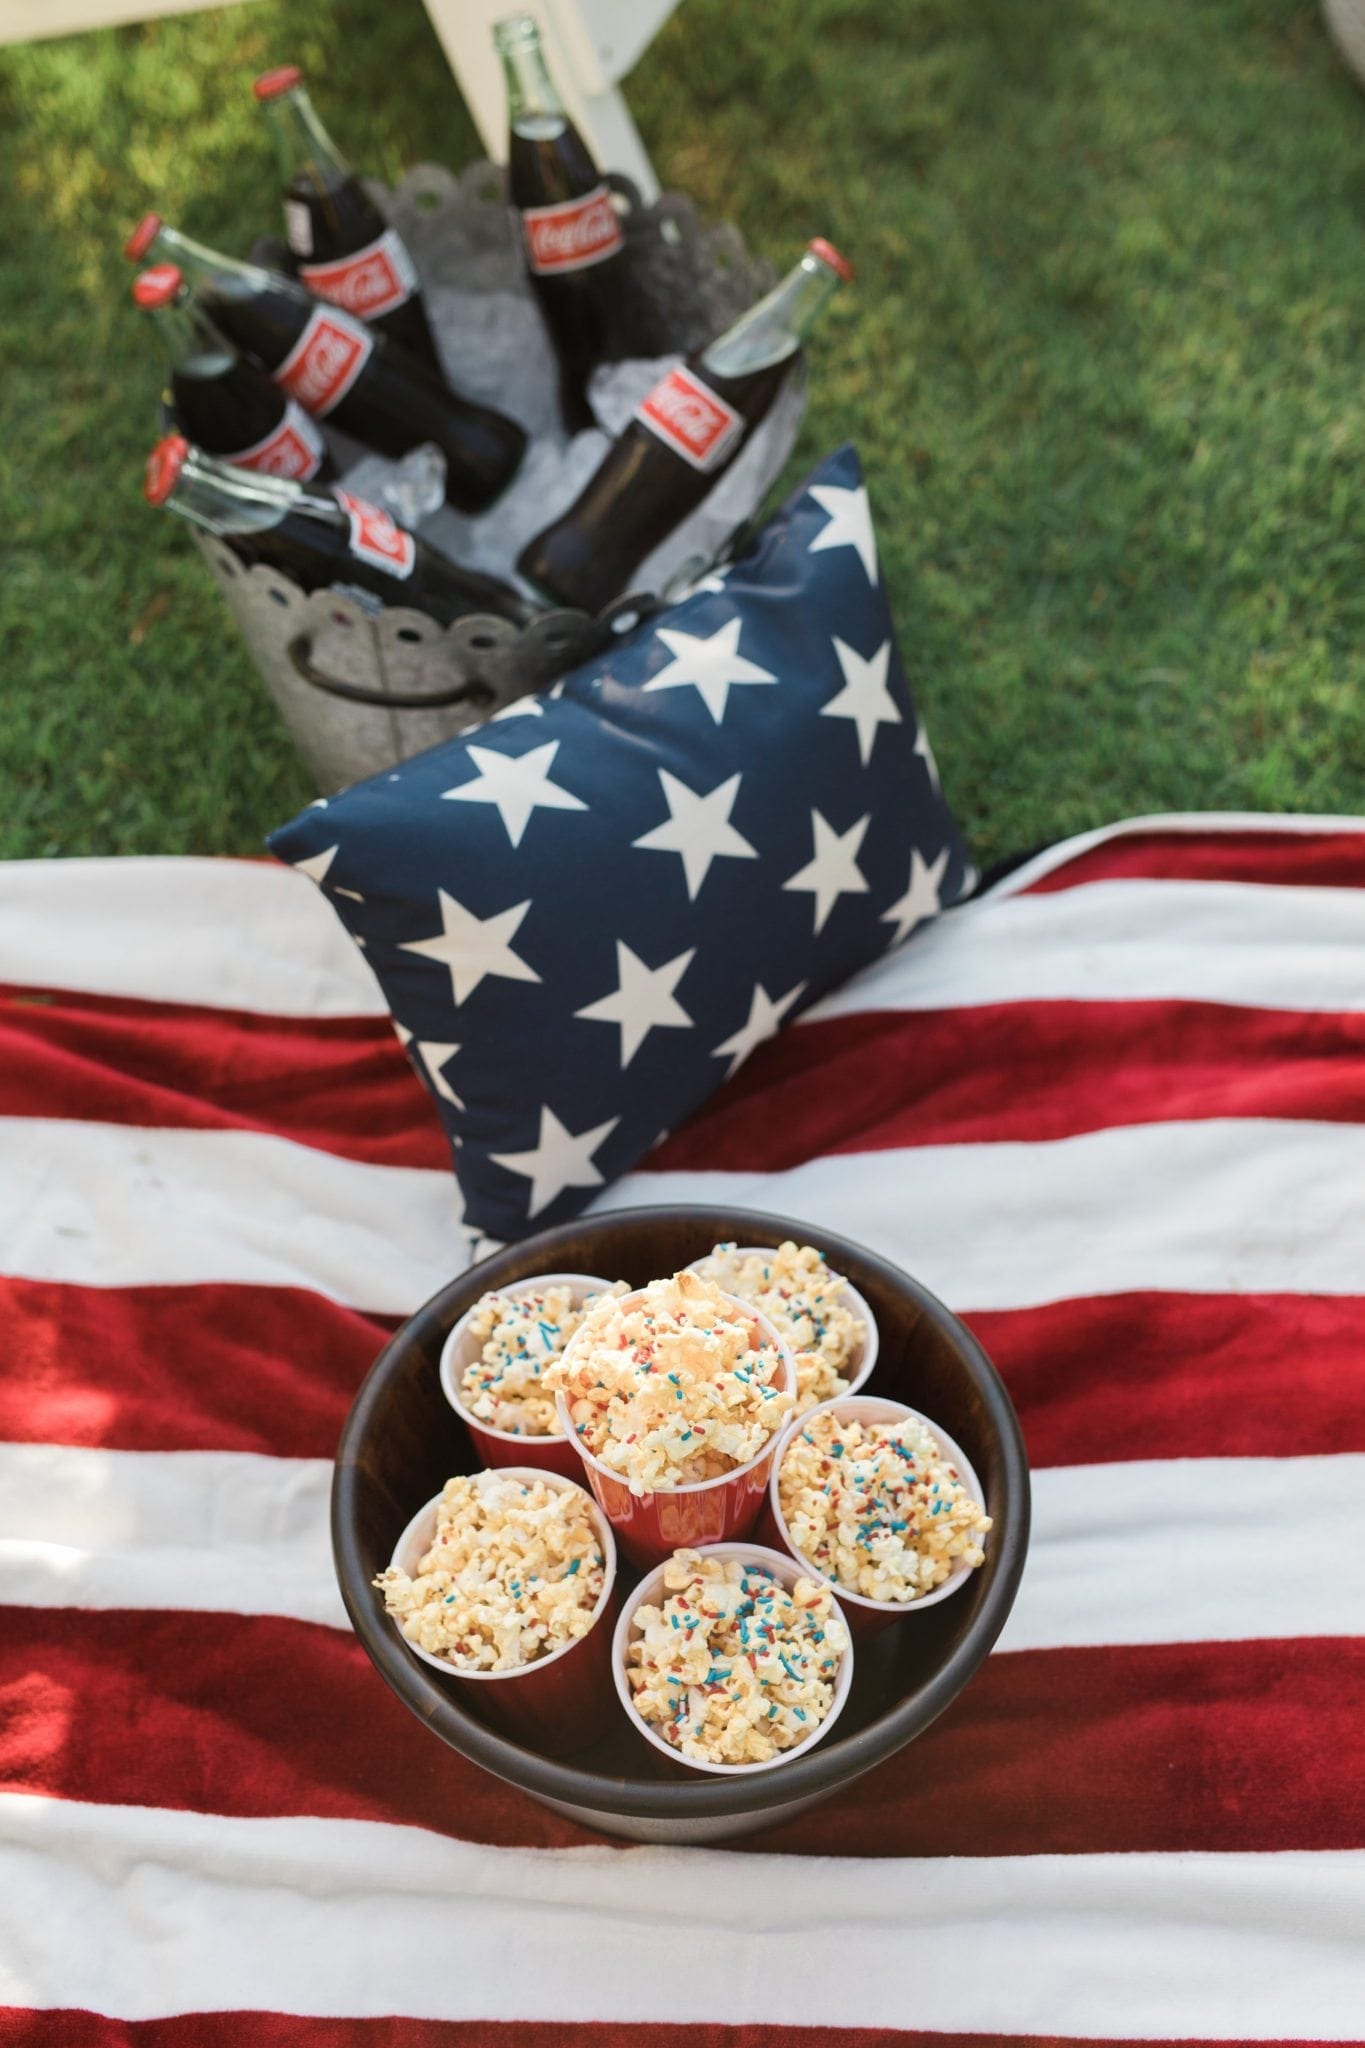 Popcorn with white chocolate and red white and blue sprinkles.